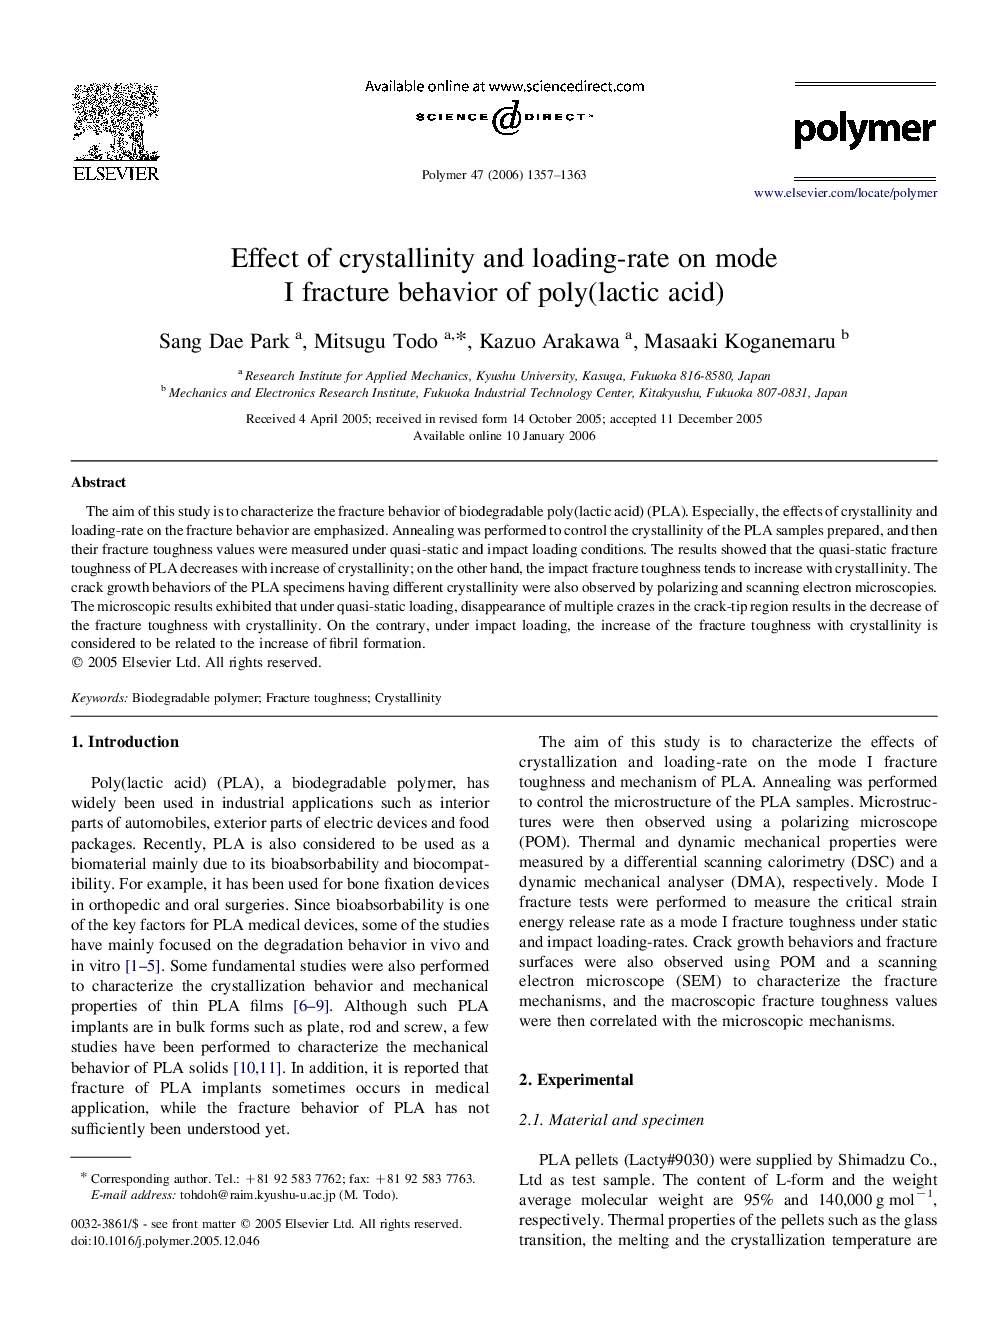 Effect of crystallinity and loading-rate on mode I fracture behavior of poly(lactic acid)